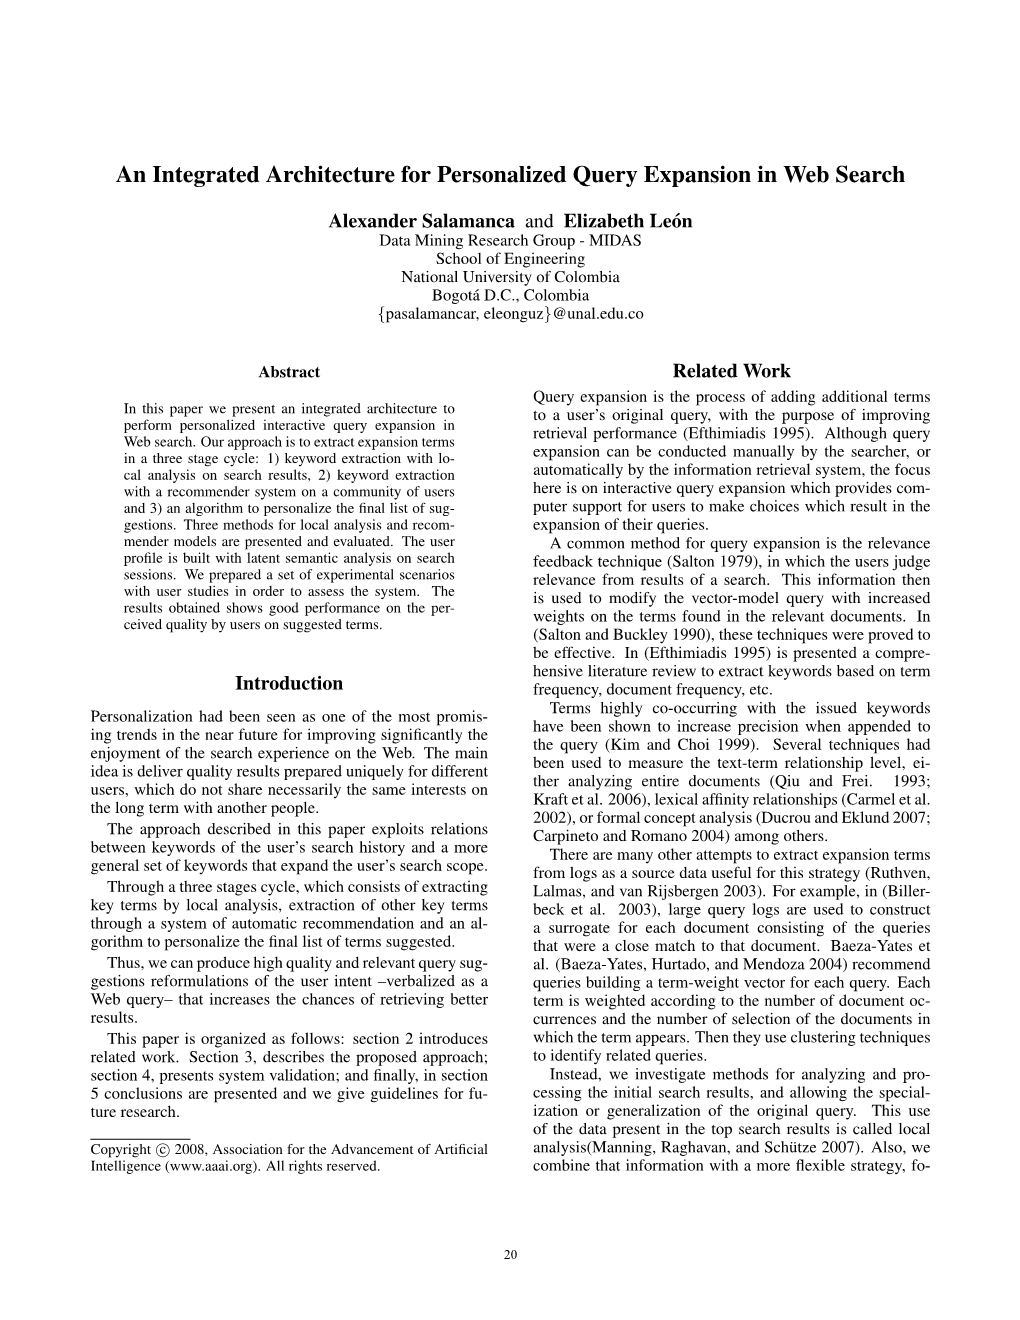 An Integrated Architecture for Personalized Query Expansion in Web Search